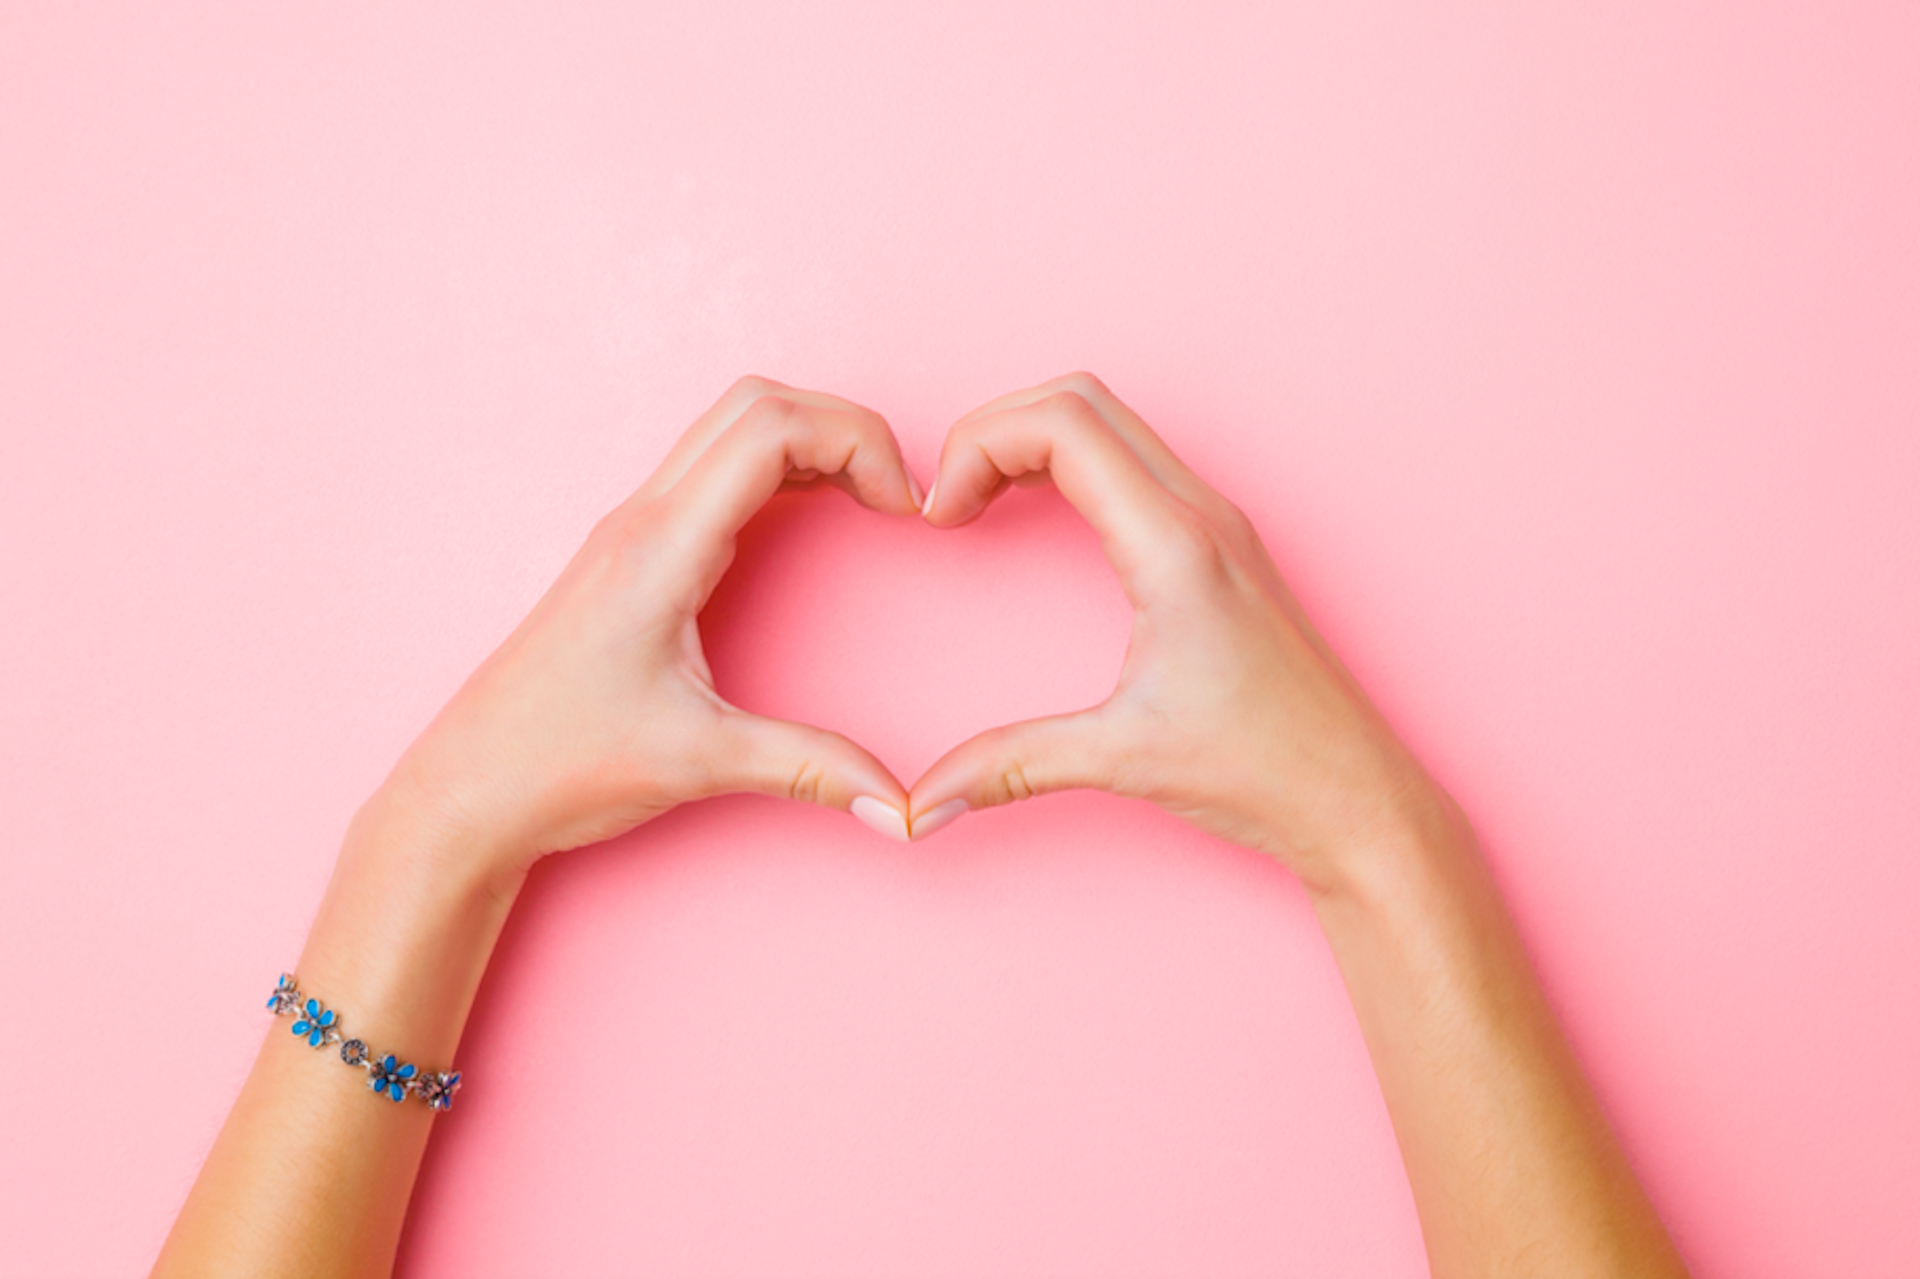 hand creating a heart shape against a pink background